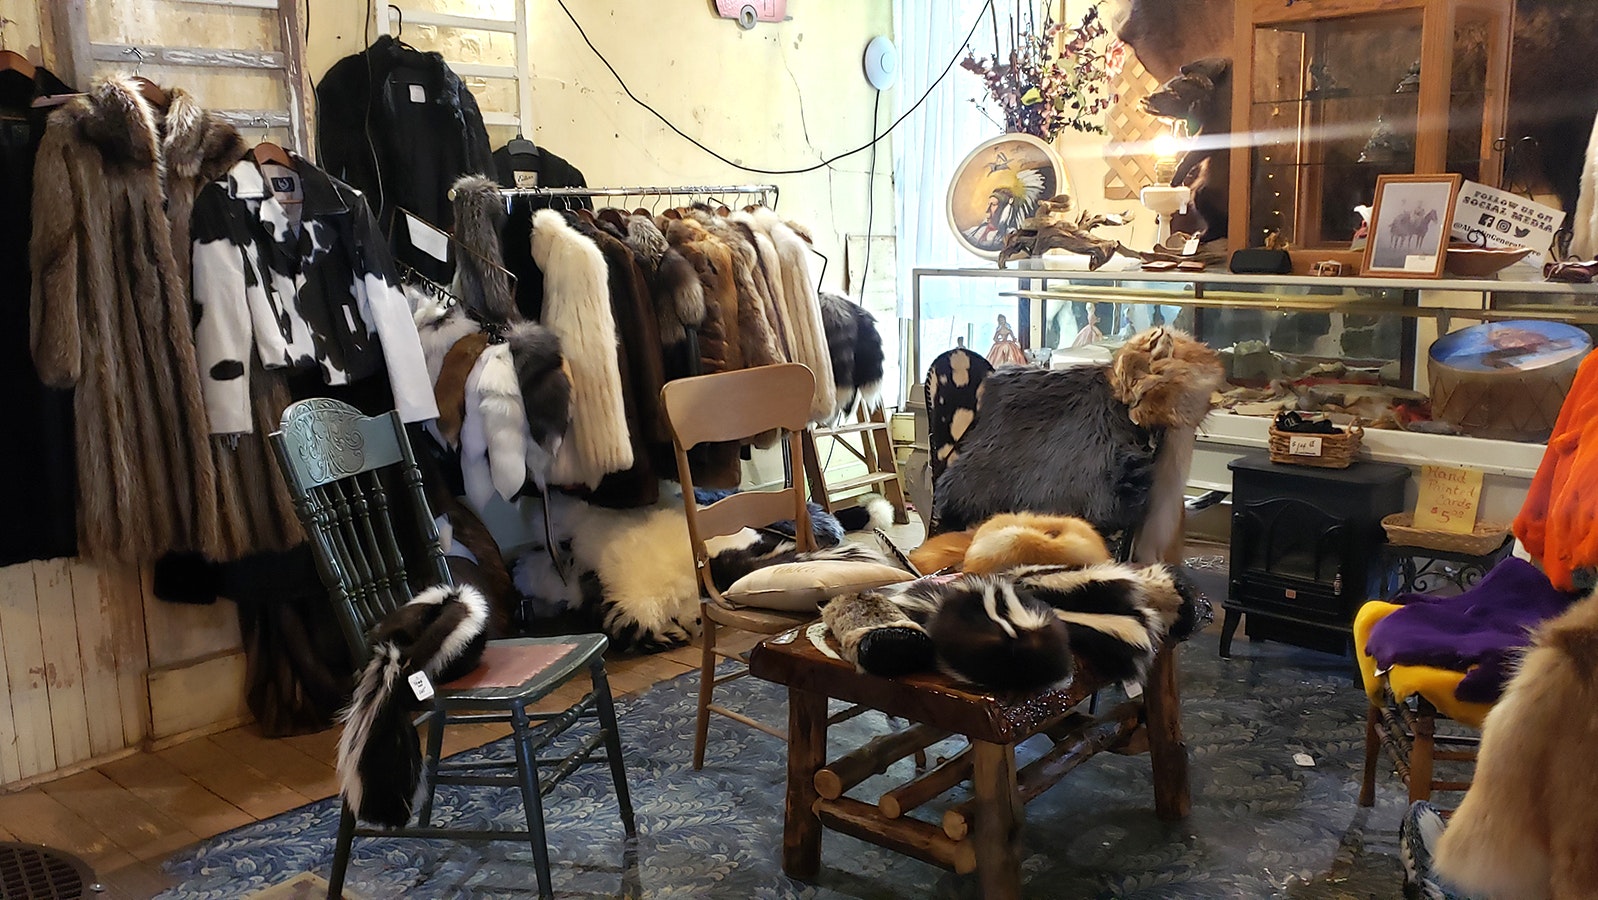 A rack of fur coats including mink and fox are for sale in the Aladdin General Store.